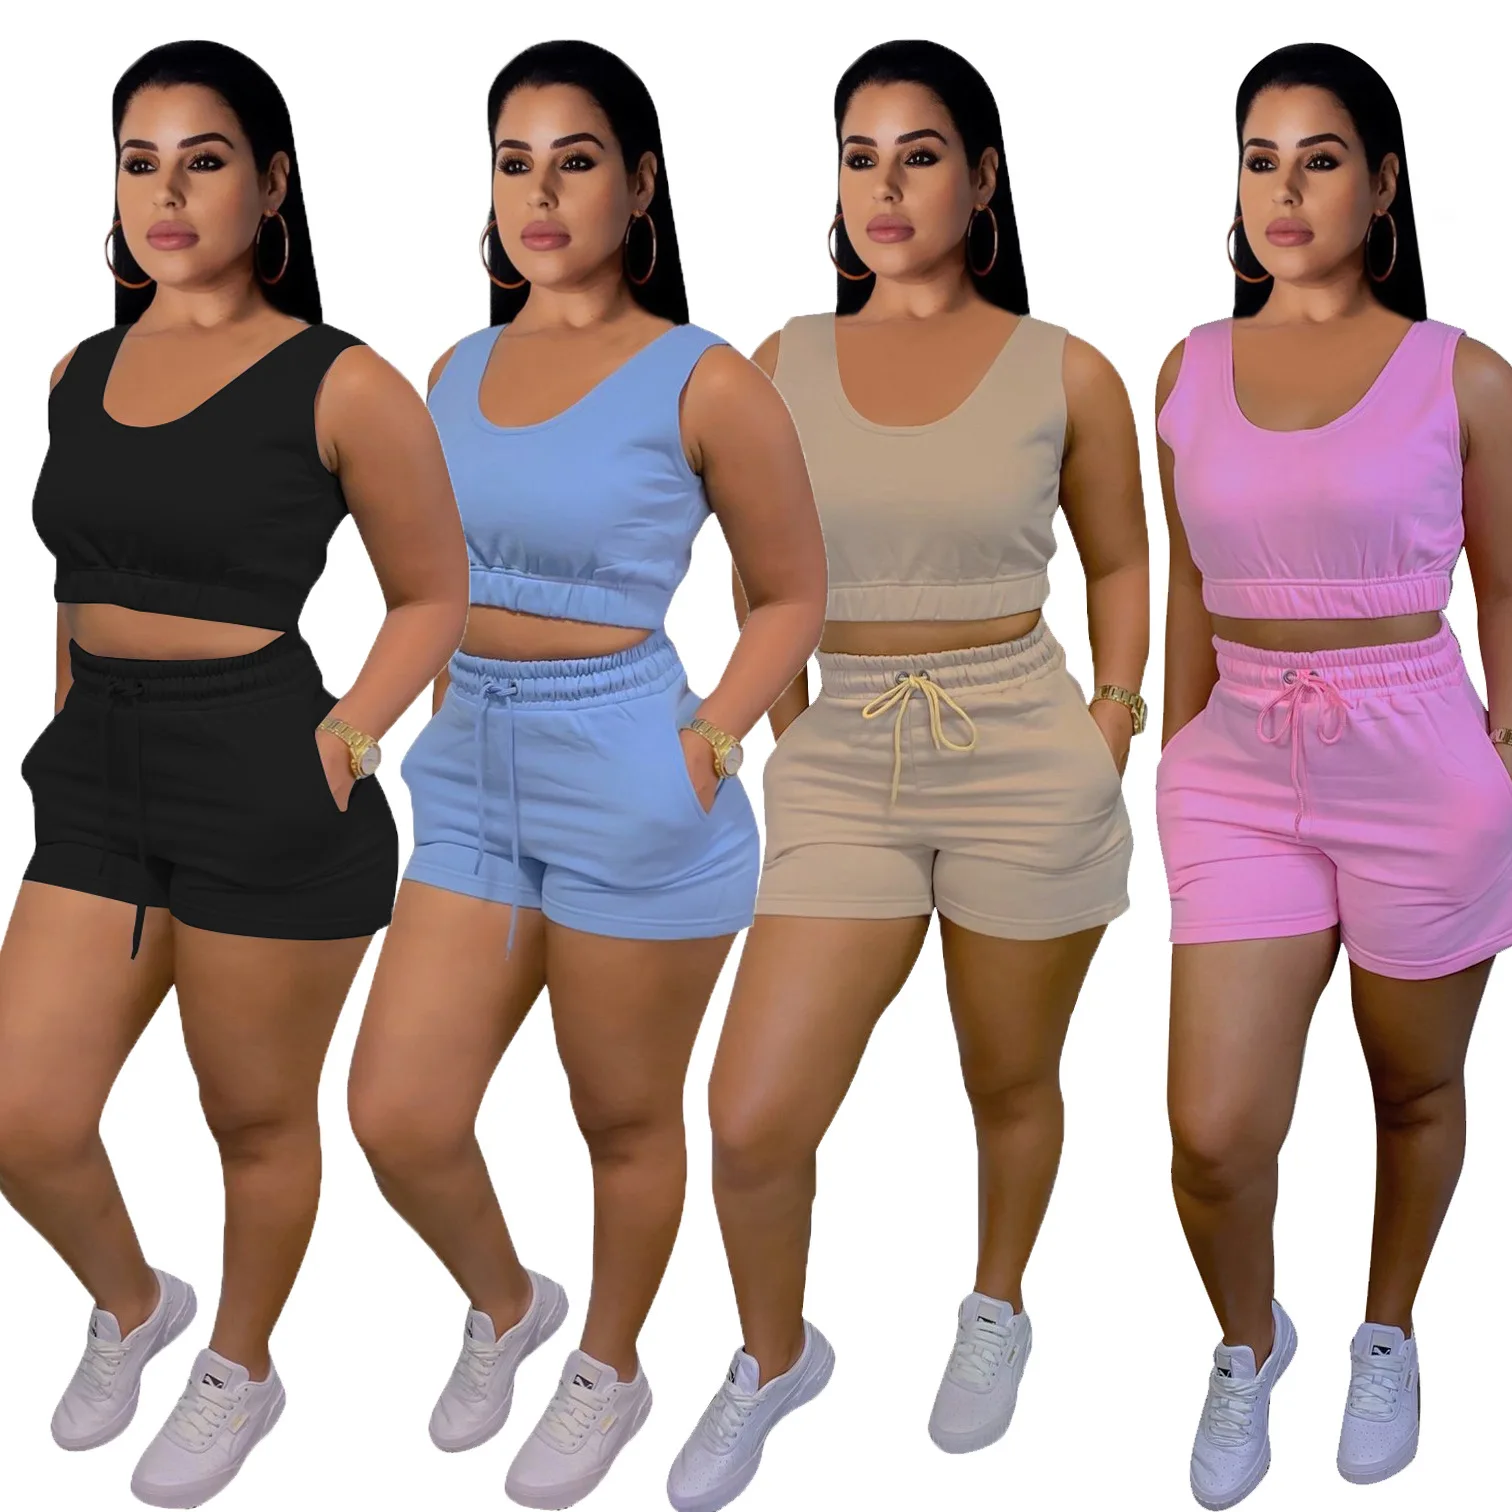 

Wholesale Custom Knit Crop Top And Biker Shorts Set Sports Yoga Gym Two Piece Set Women Clothing Summer Sets For Women Clothing, As show